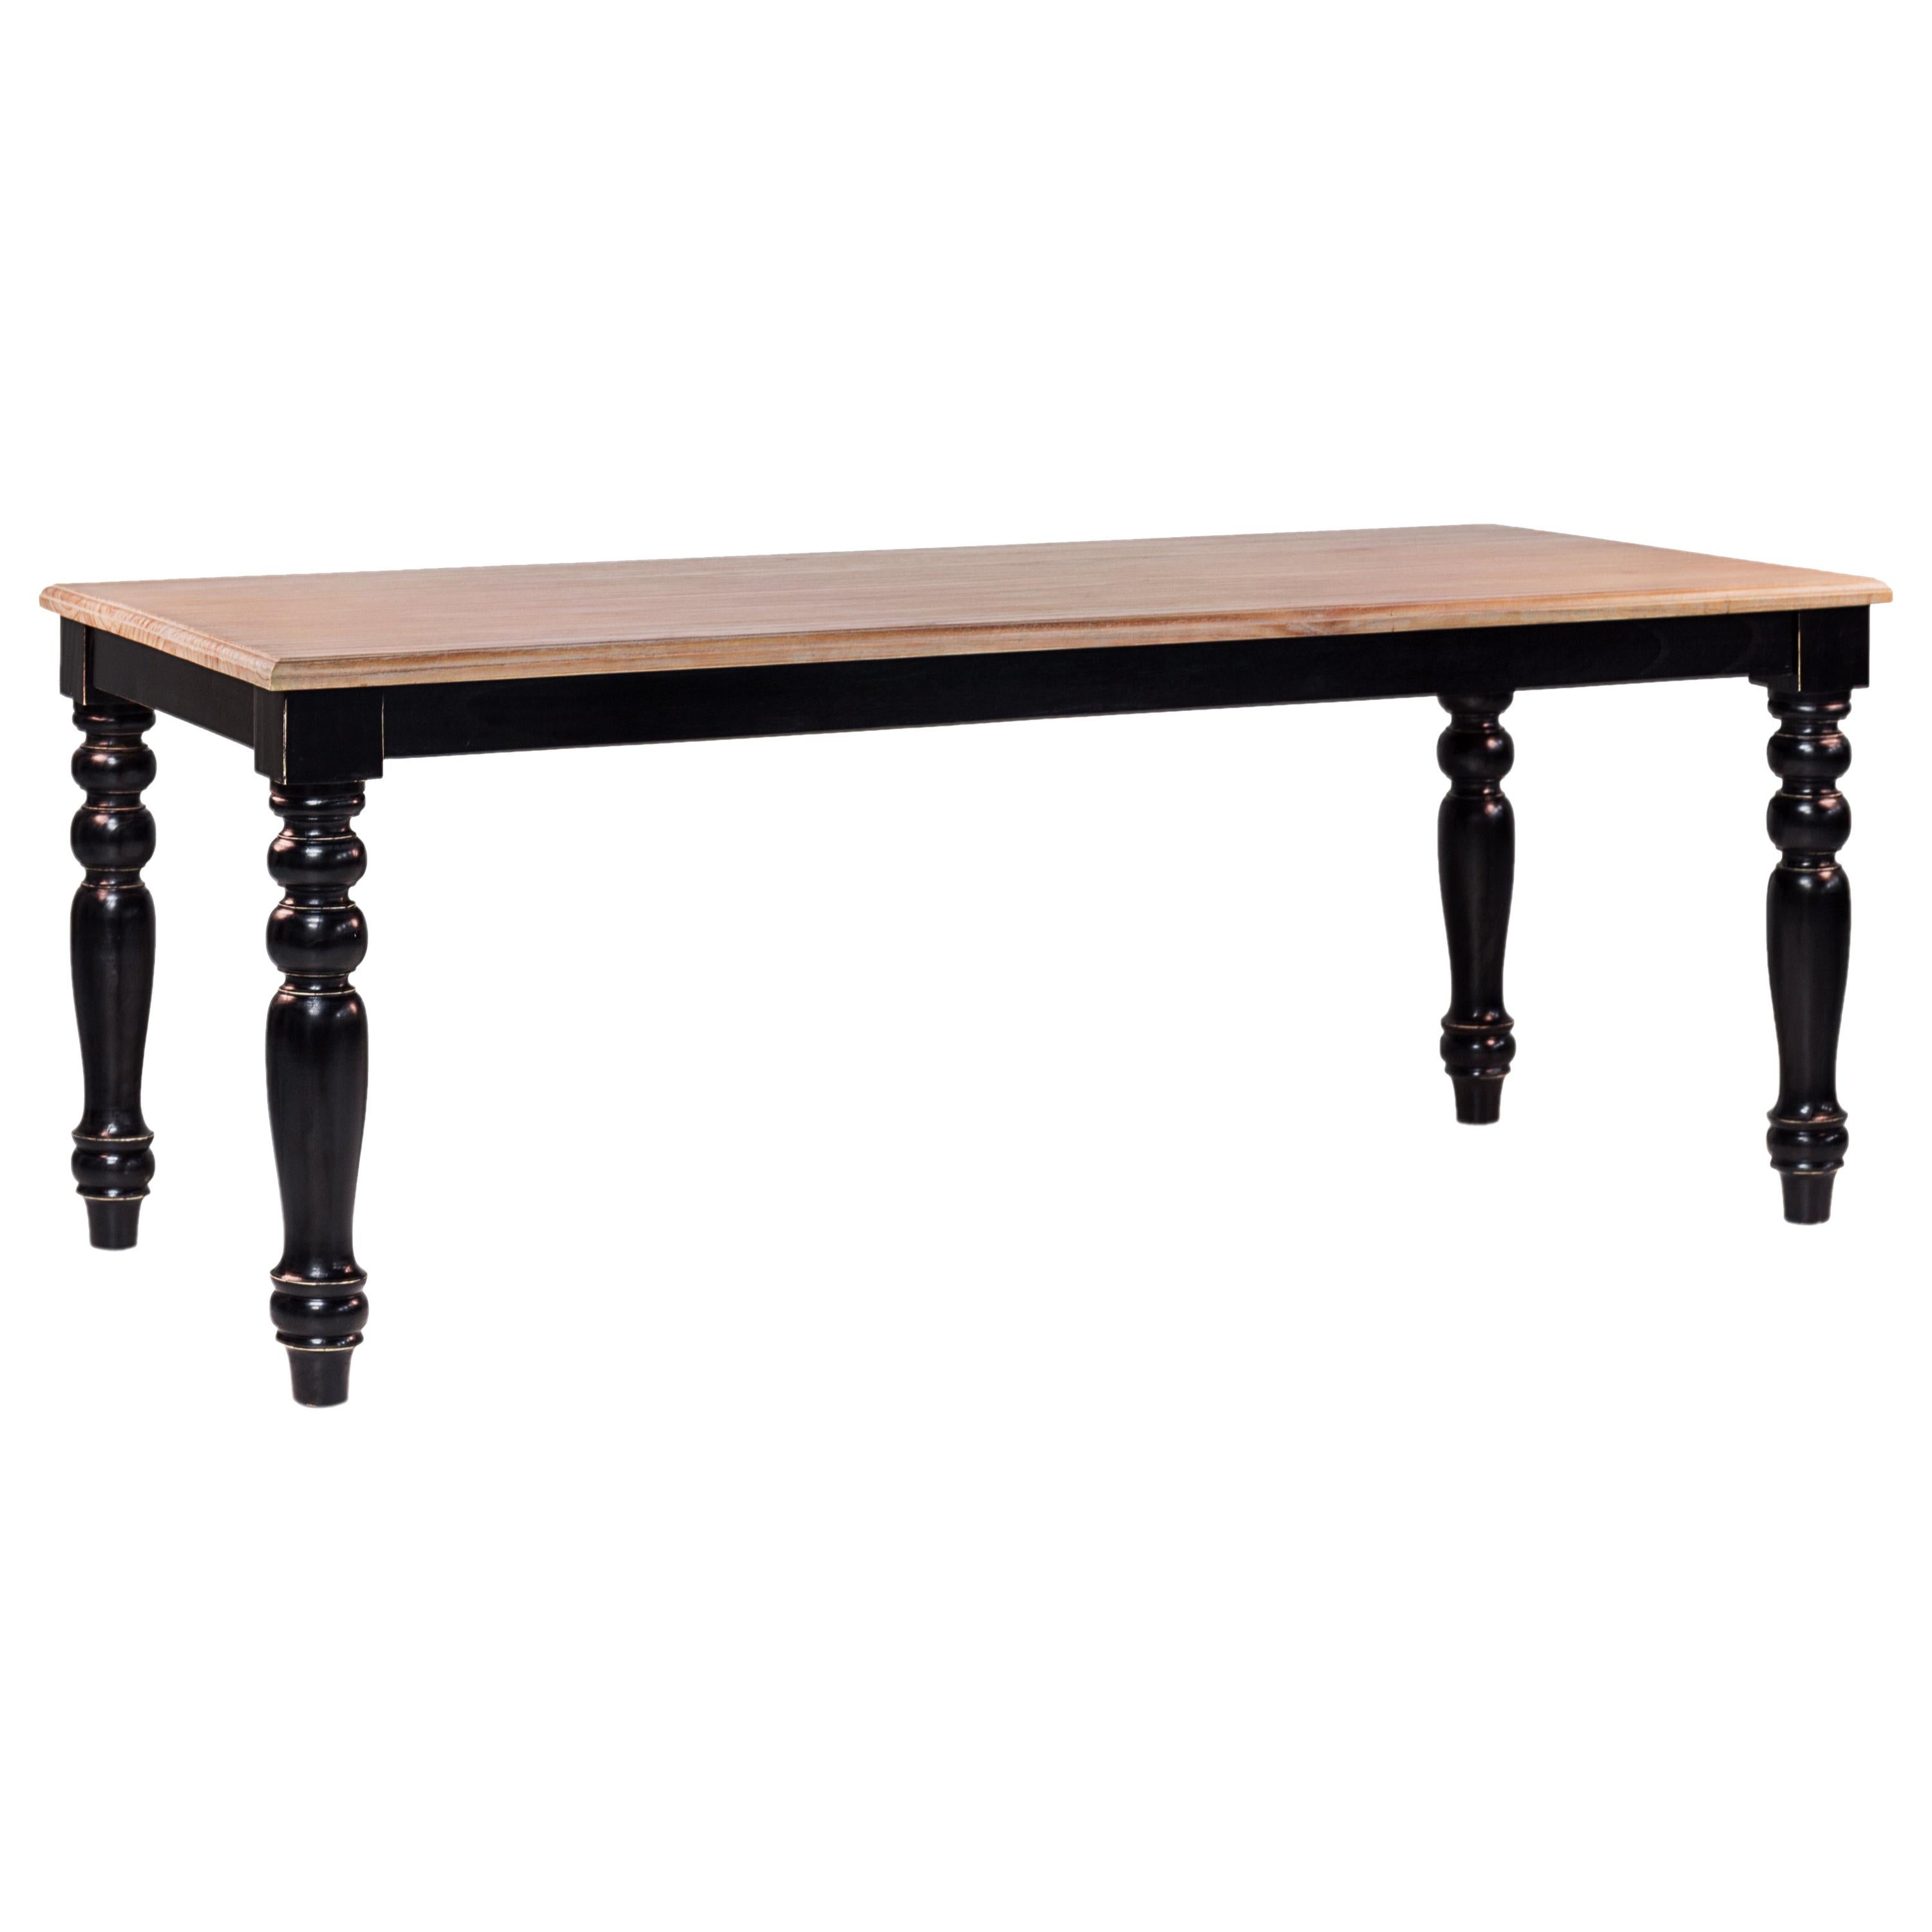 French Provincial Style Dining Room Table with Black Ebonized legs For Sale